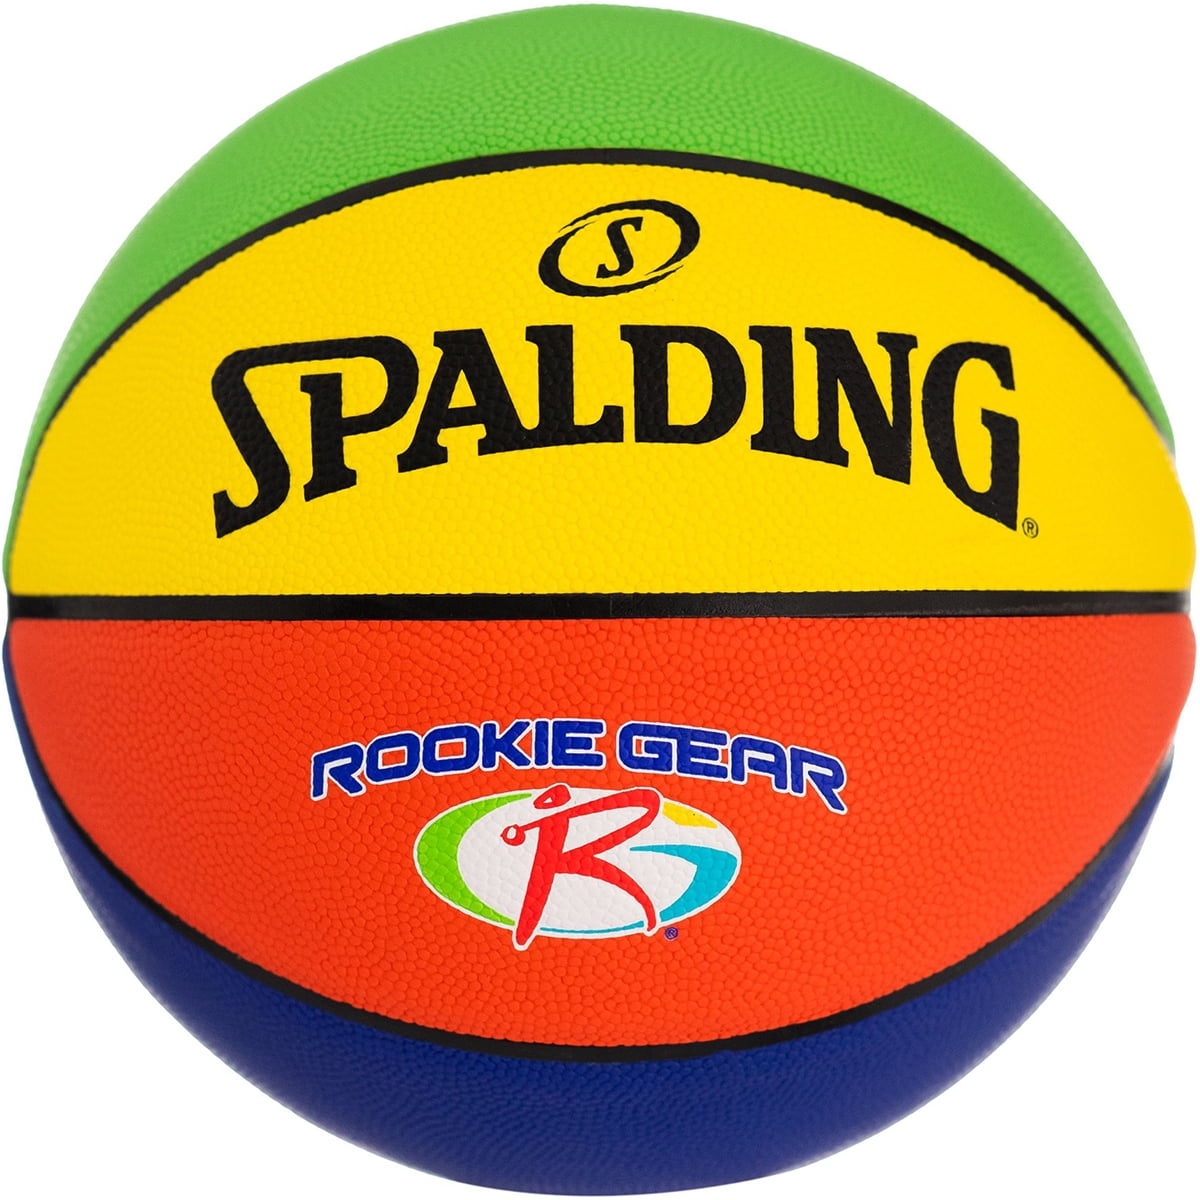 Spalding 1273274 Rookie Gear Basketball - Brown, 1 - Fry's Food Stores